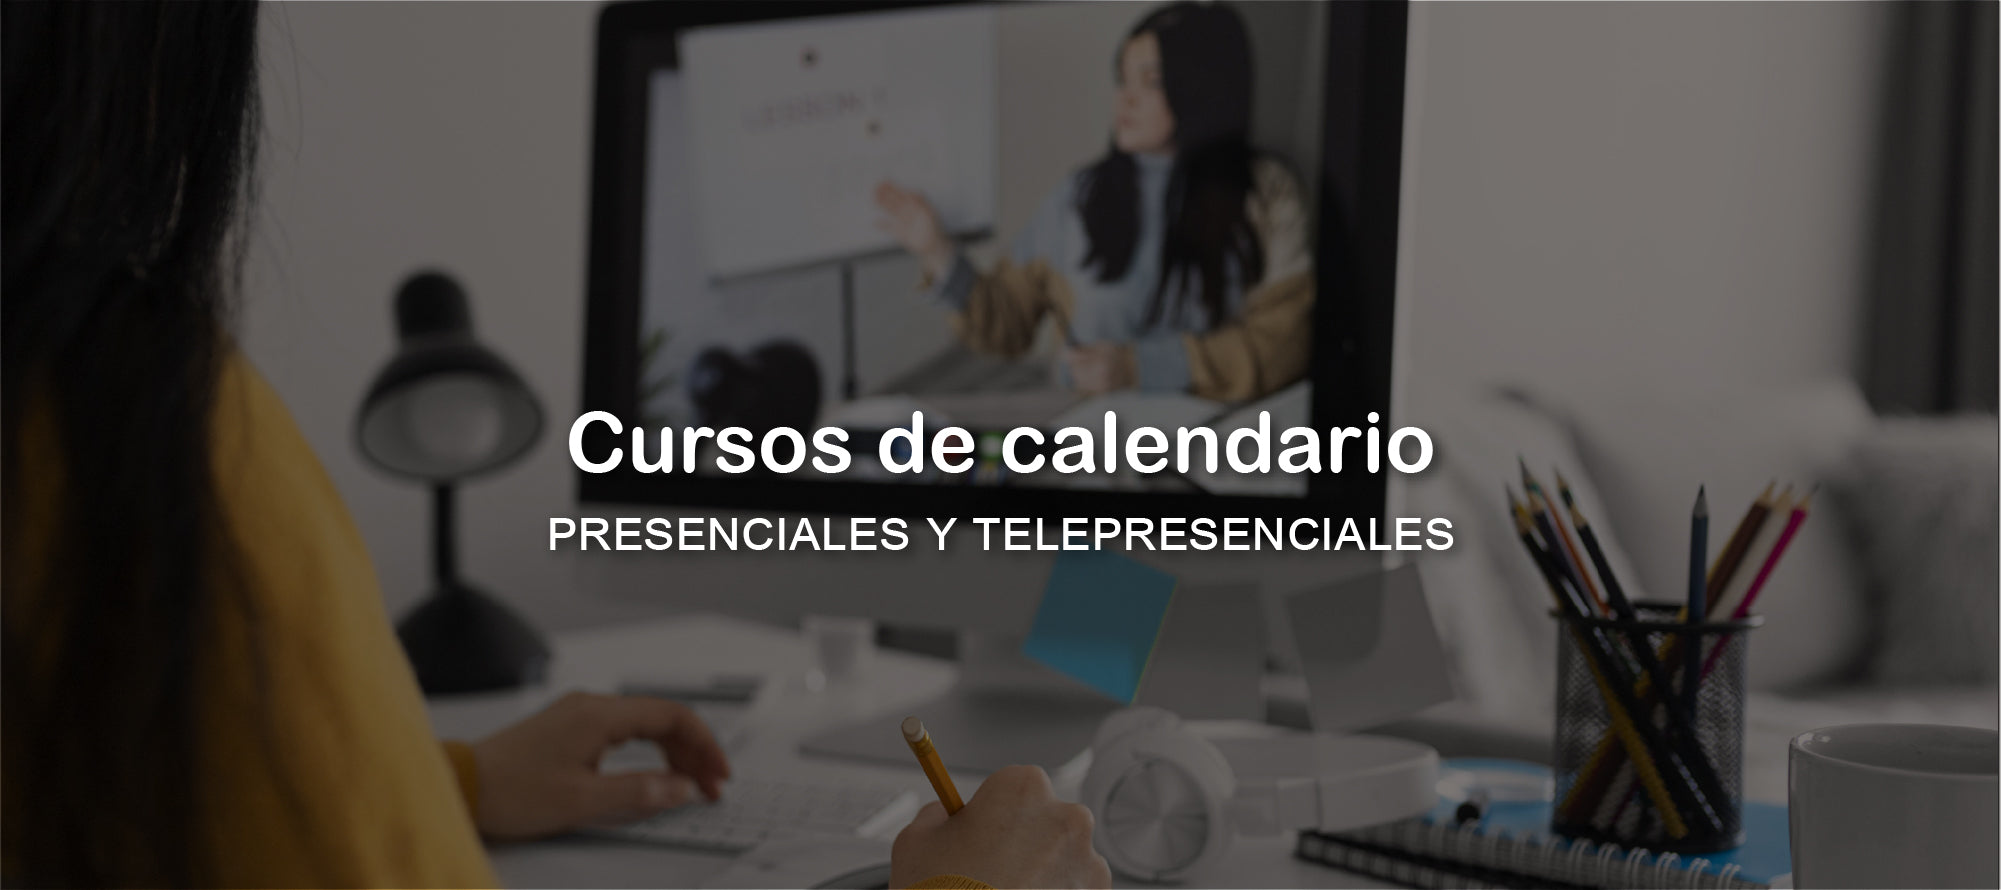 In-person and tele-in-person calendar courses